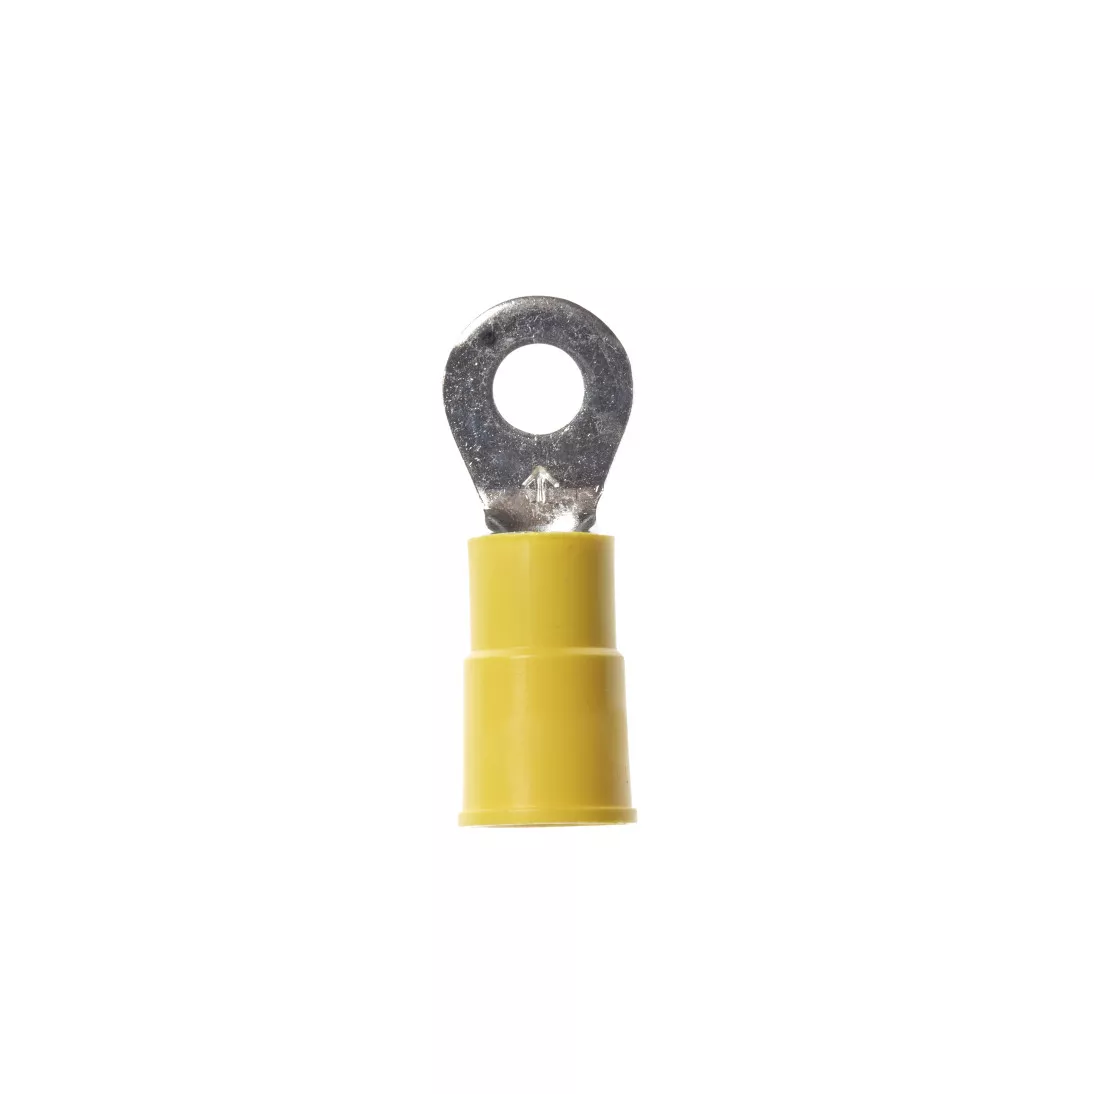 3M™ Scotchlok™ Ring Vinyl Insulated, 50/bottle, MV10-8RX, standard-style
ring tongue fits around the stud, 500/Case